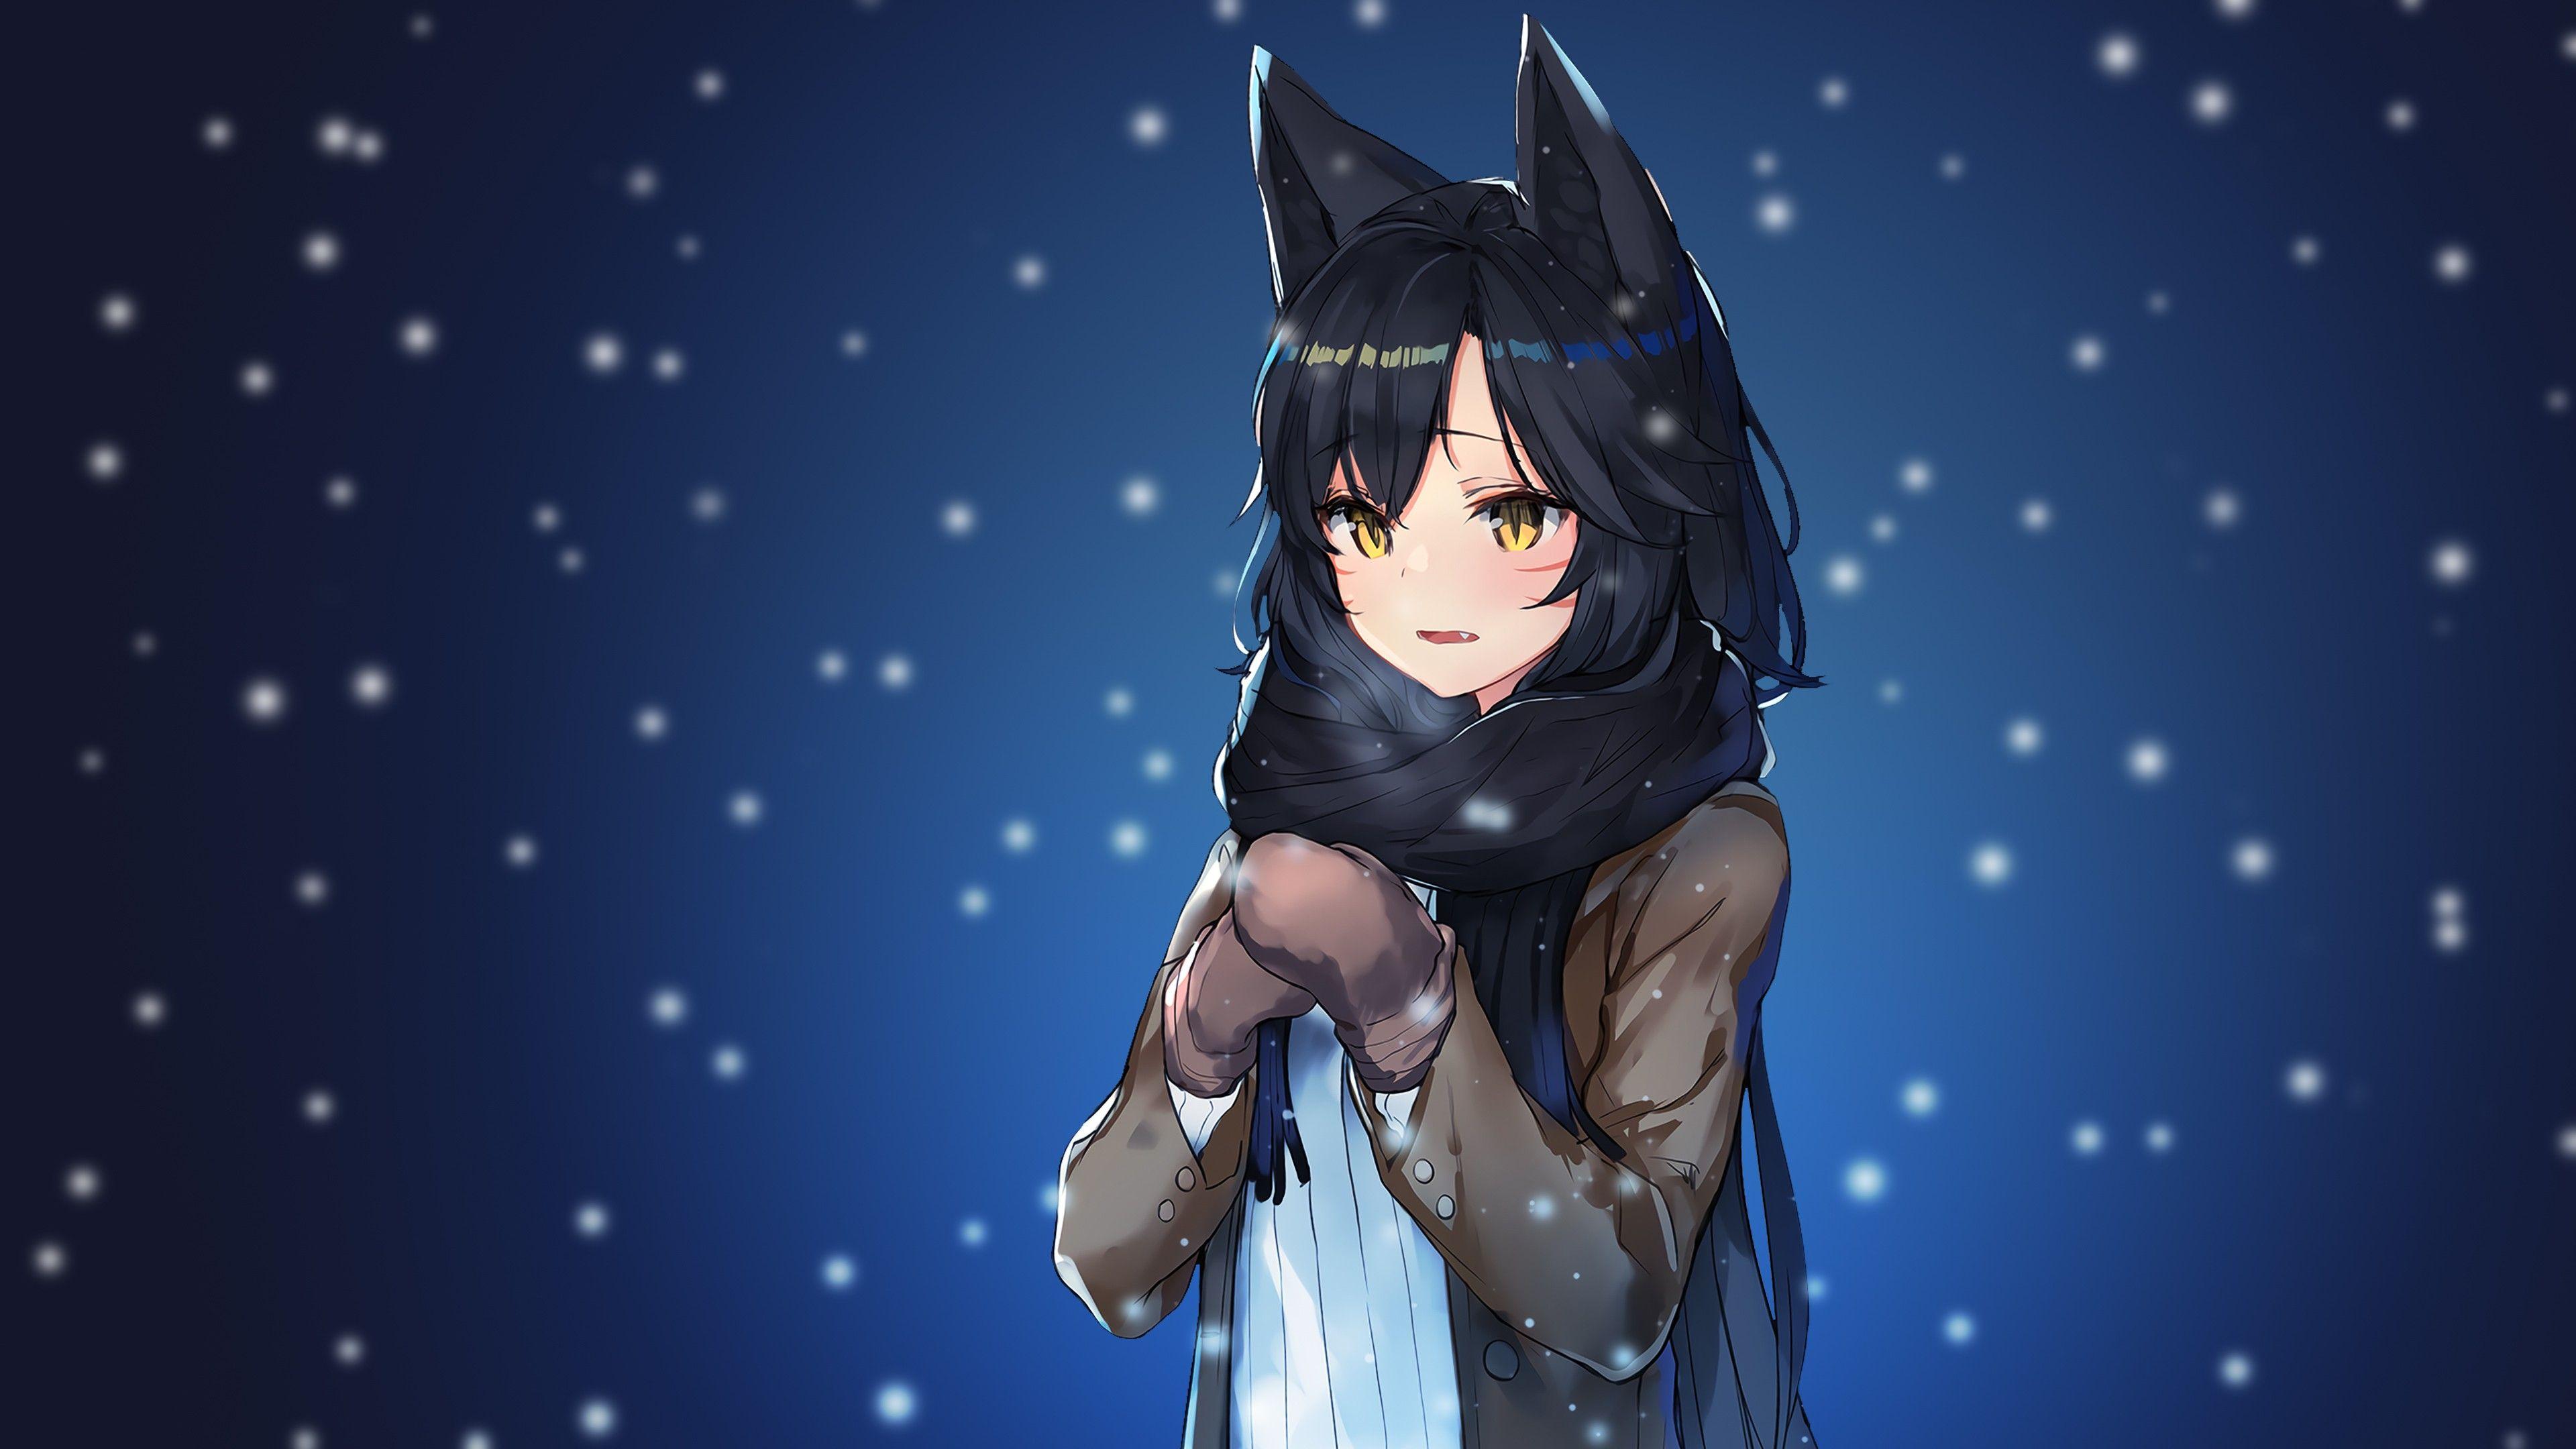 Wolf Girl - wide 4